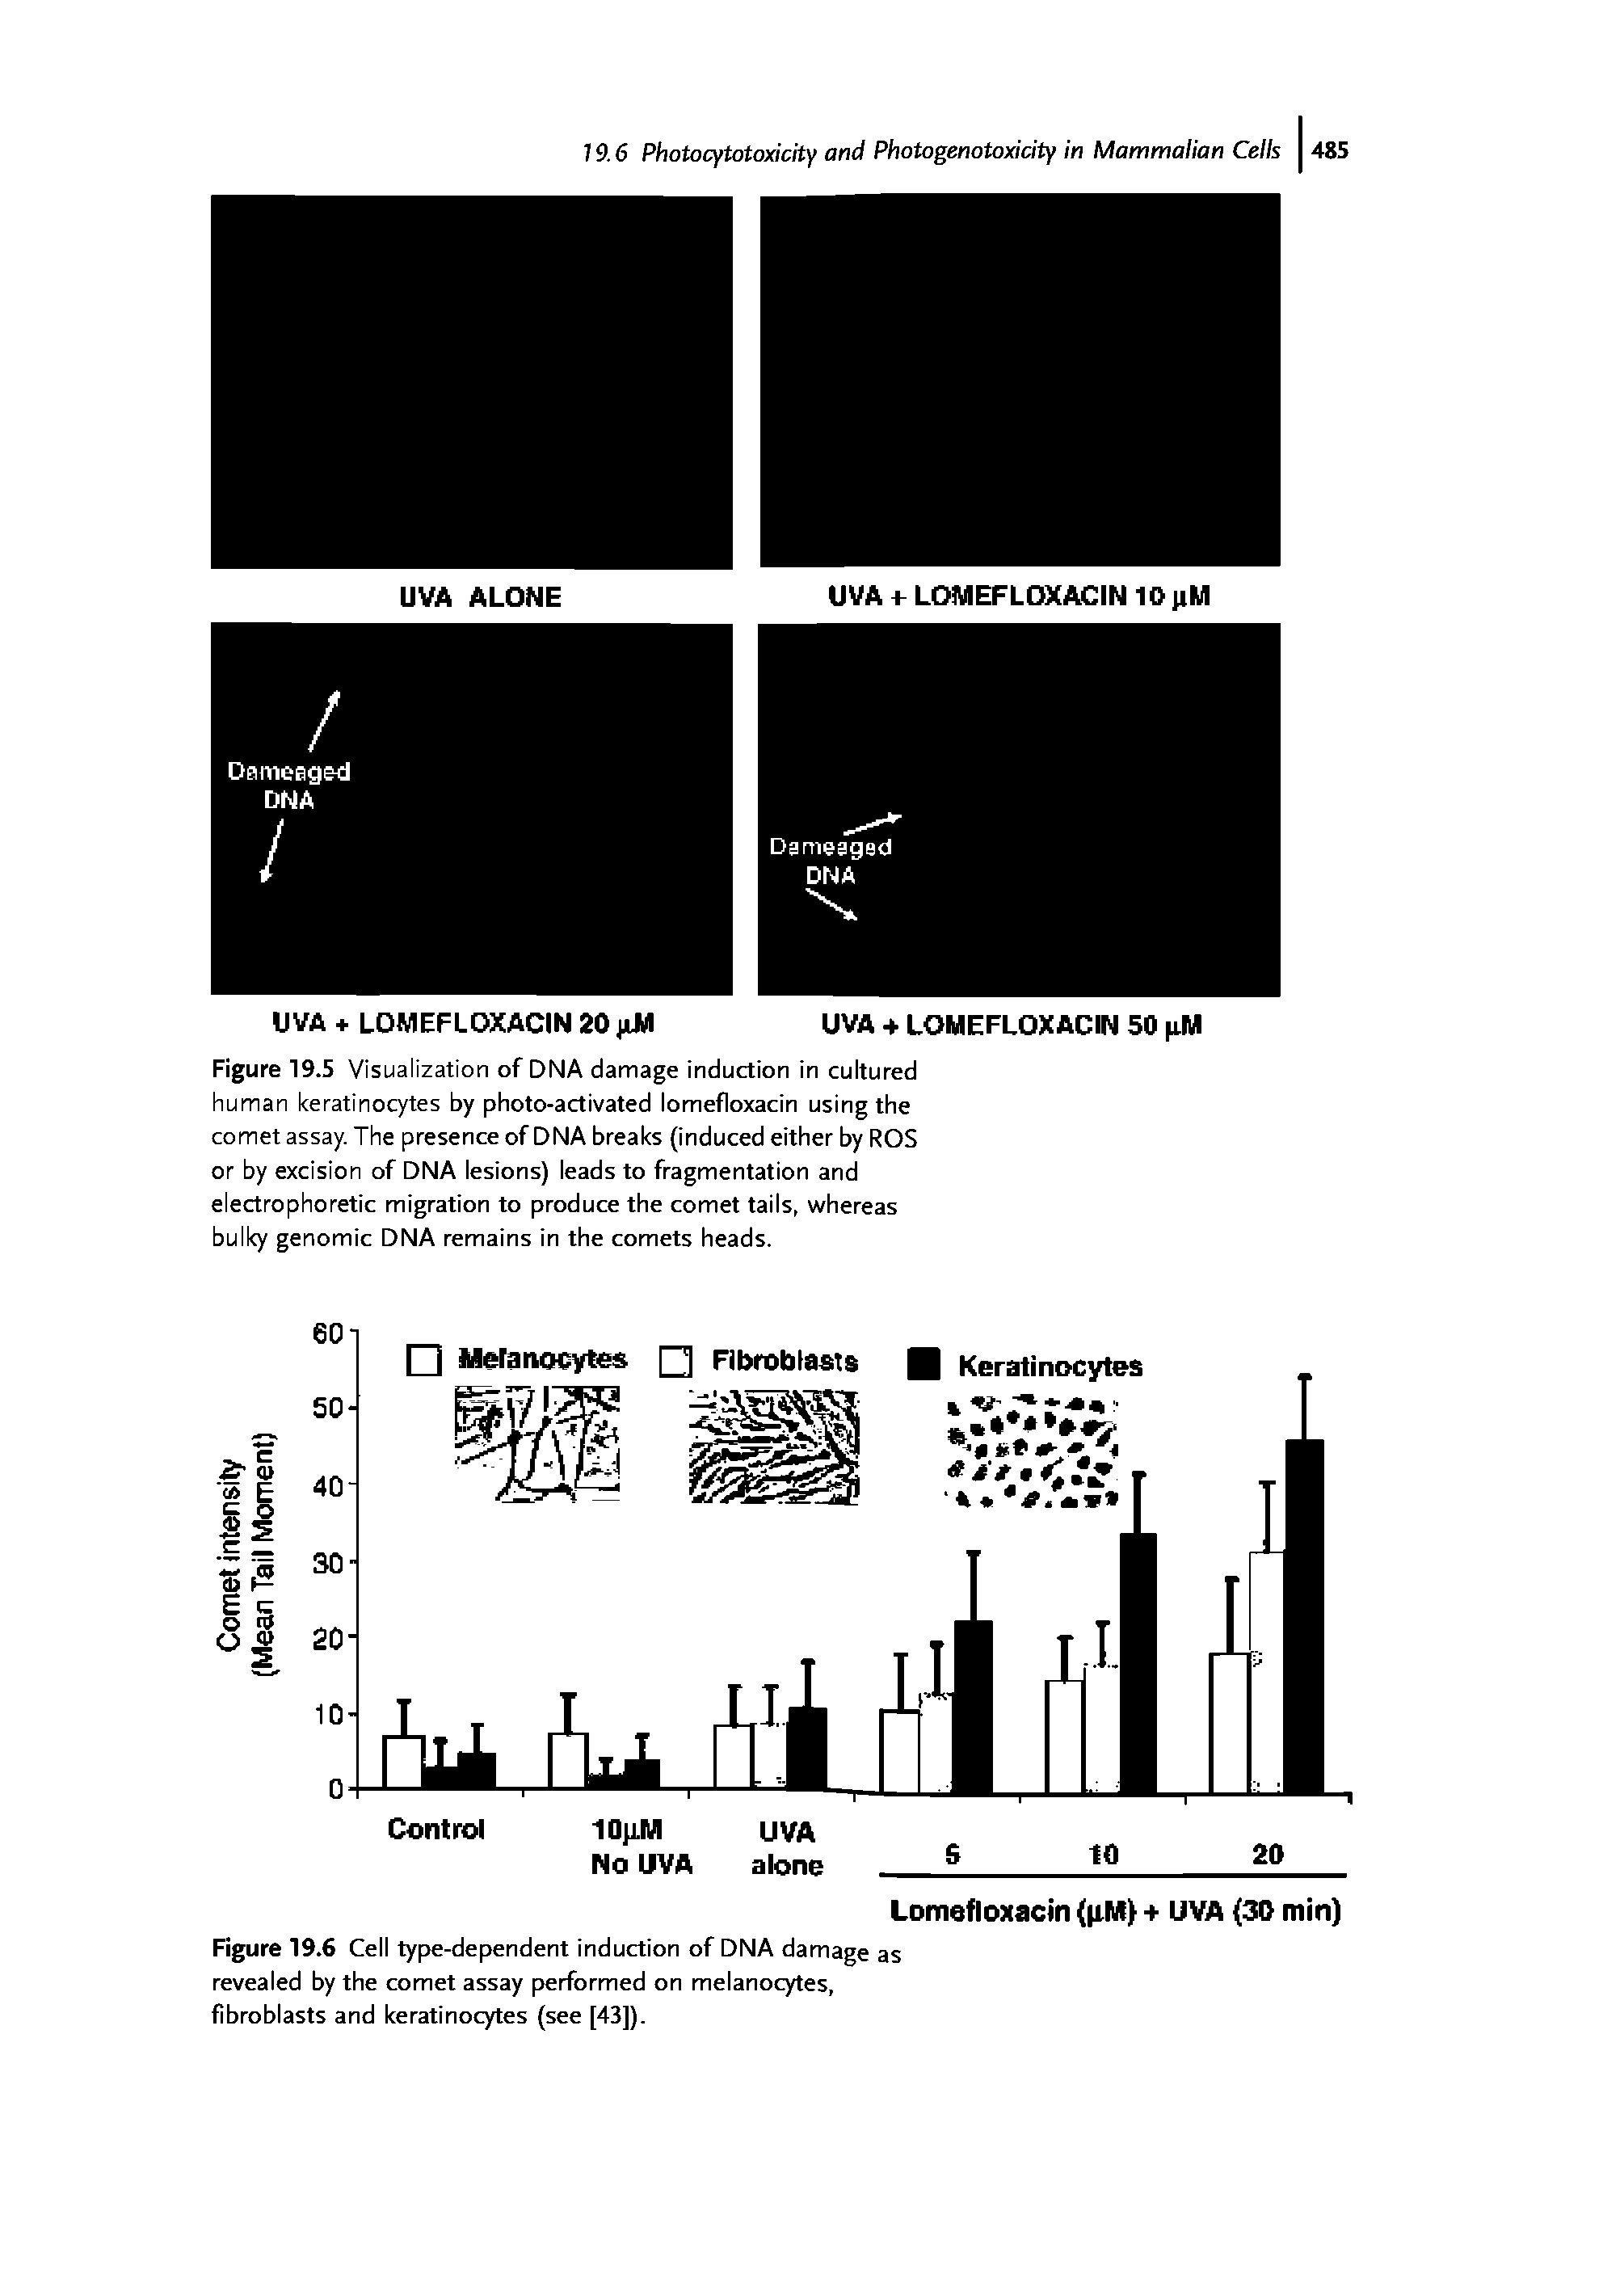 Figure 19.5 Visualization of DNA damage induction in cultured human keratinocytes by photo-activated lomefloxacin using the comet assay. The presence of DNA breaks (induced either by ROS or by excision of DNA lesions) leads to fragmentation and electrophoretic migration to produce the comet tails, whereas bulky genomic DNA remains in the comets heads.